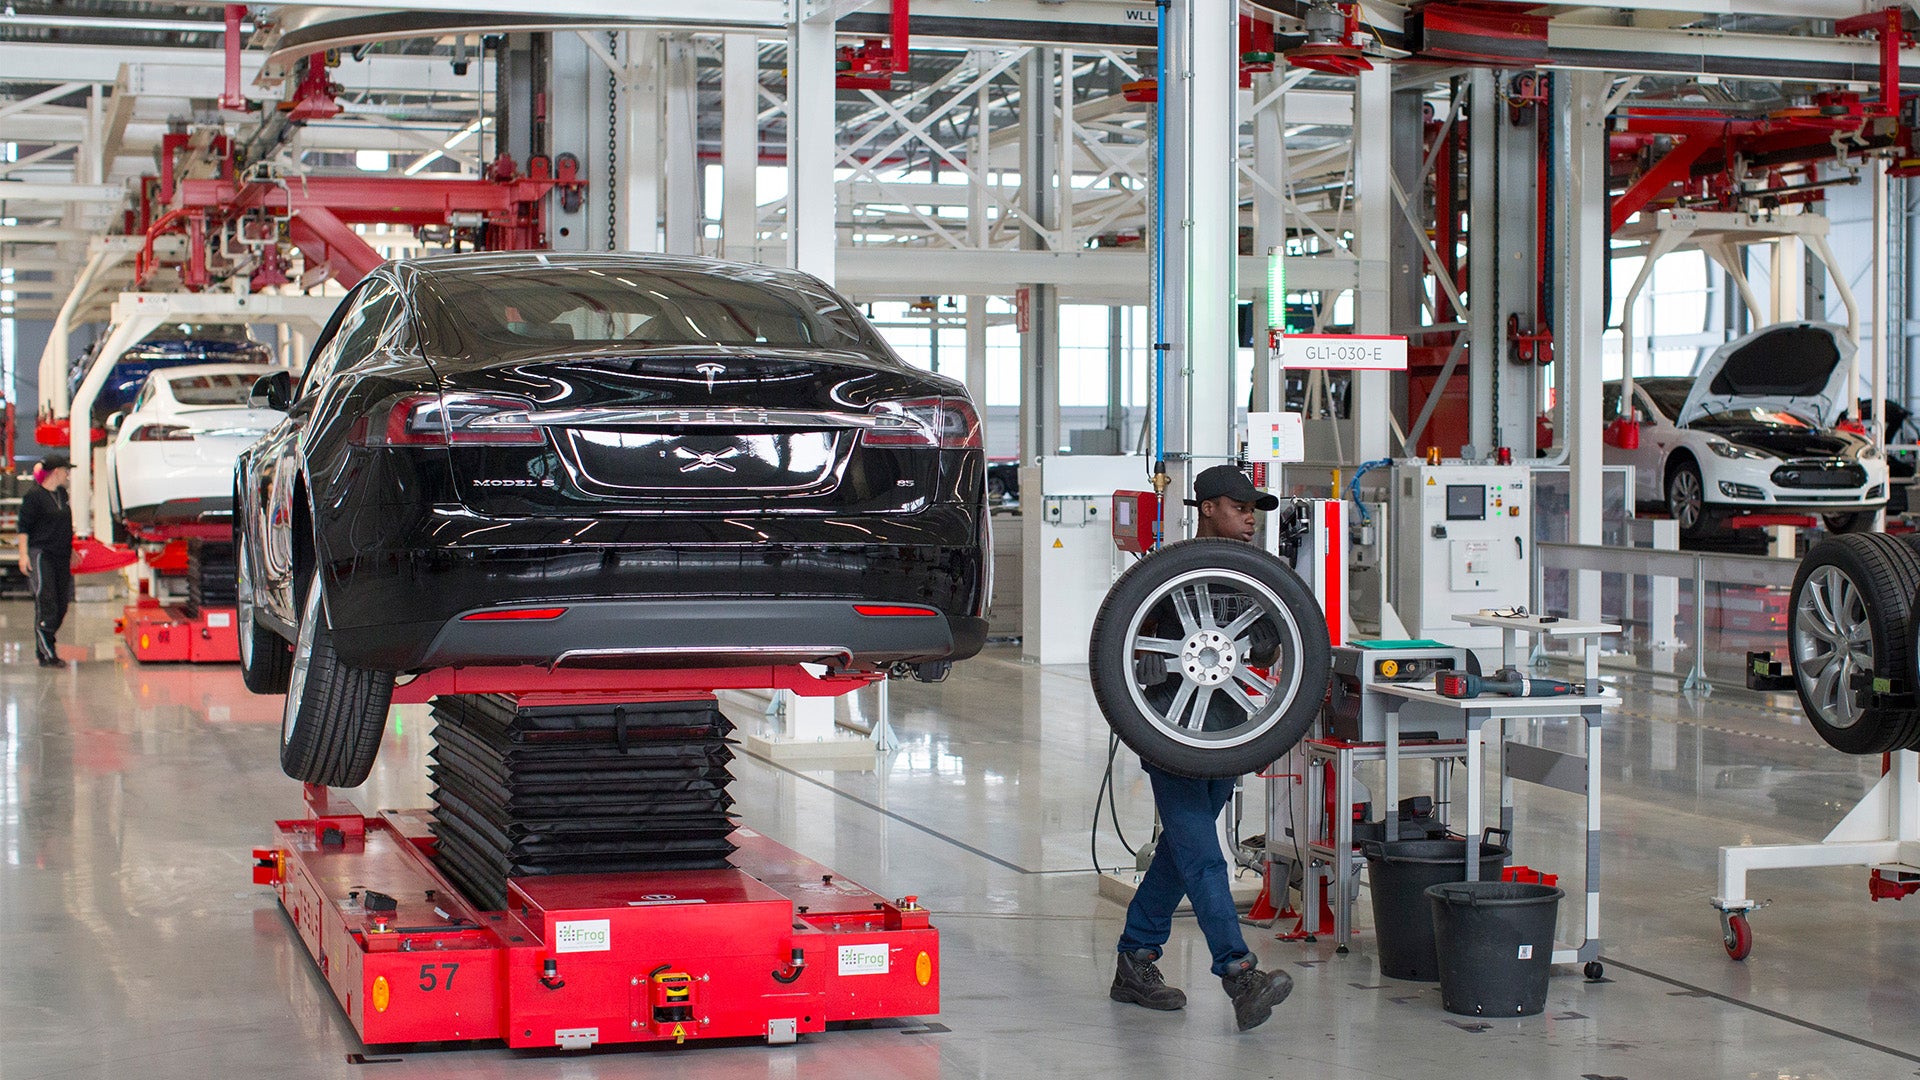 Tesla’s Model 3 ‘Production Hell’ May Raise Tensions Between Carmaker, Workers